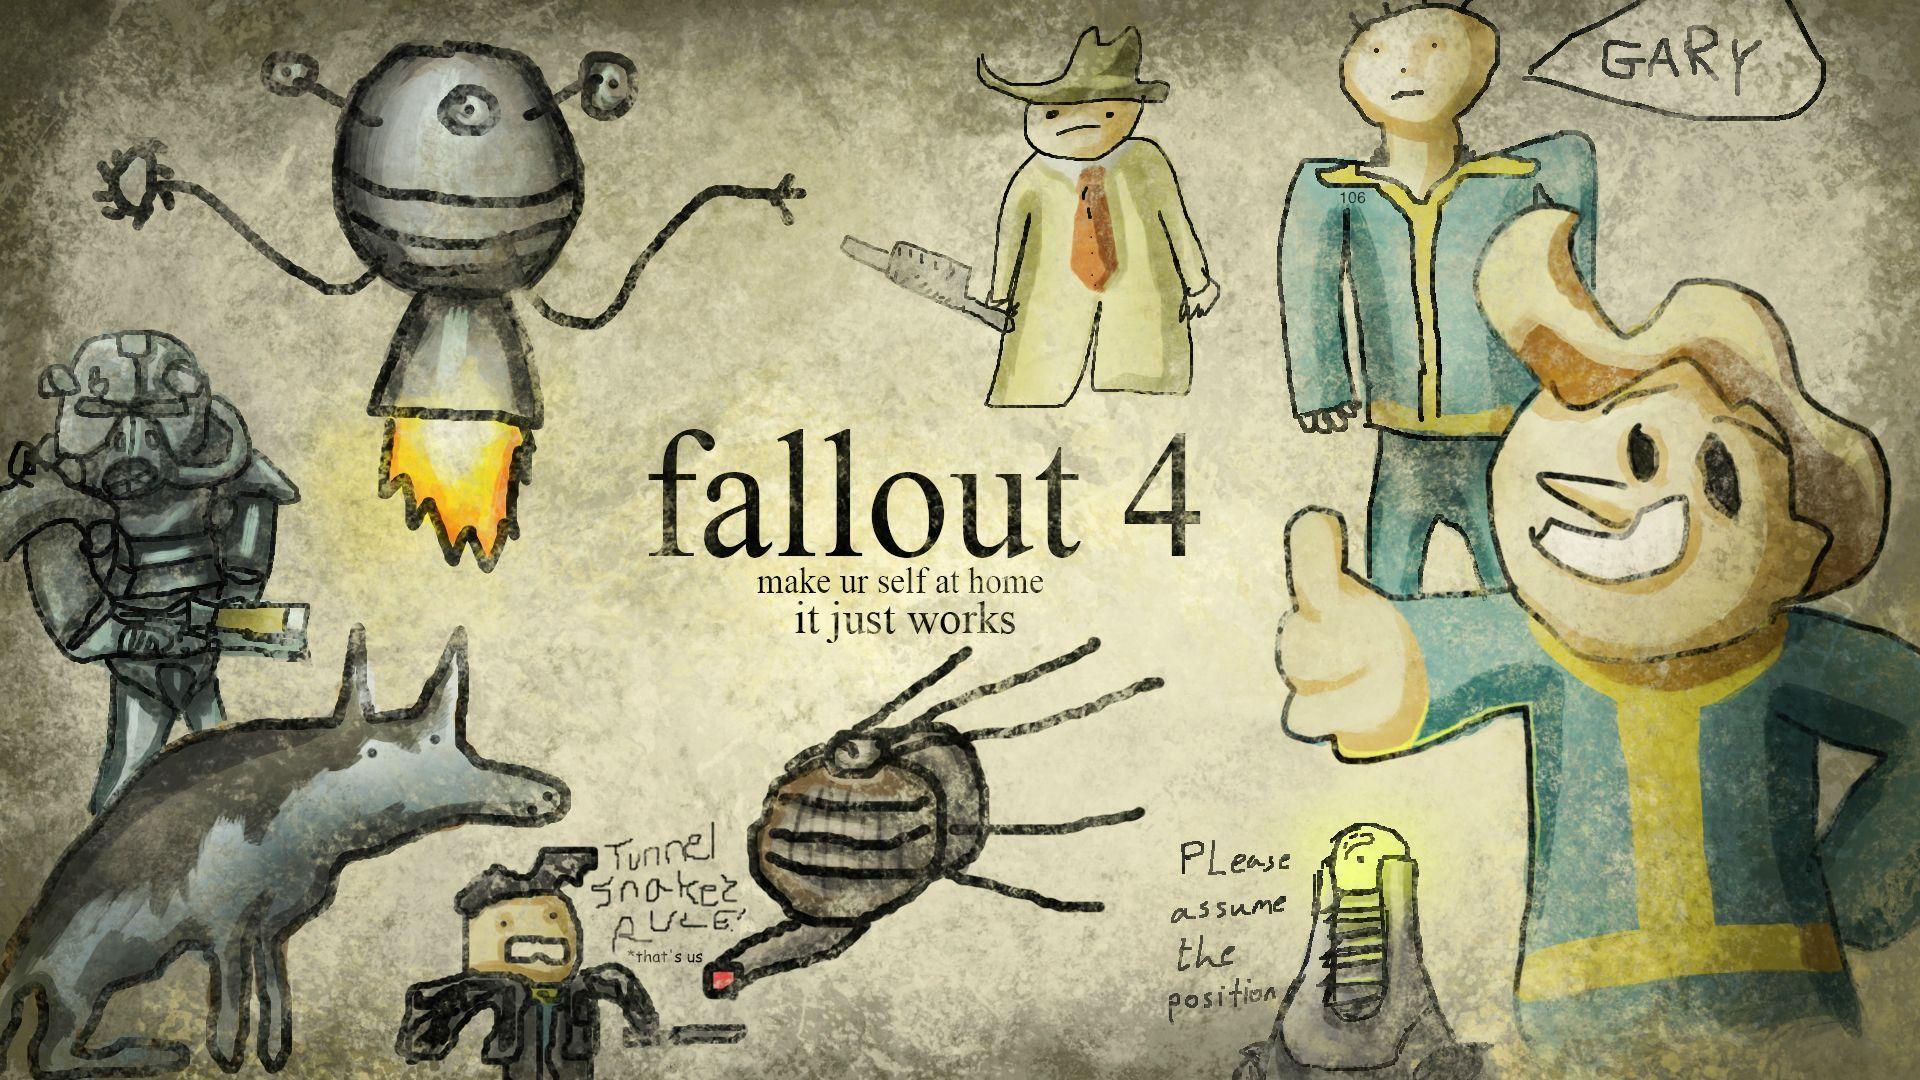 Image for Fallout 4 Wallpaper Free. Wallpape r